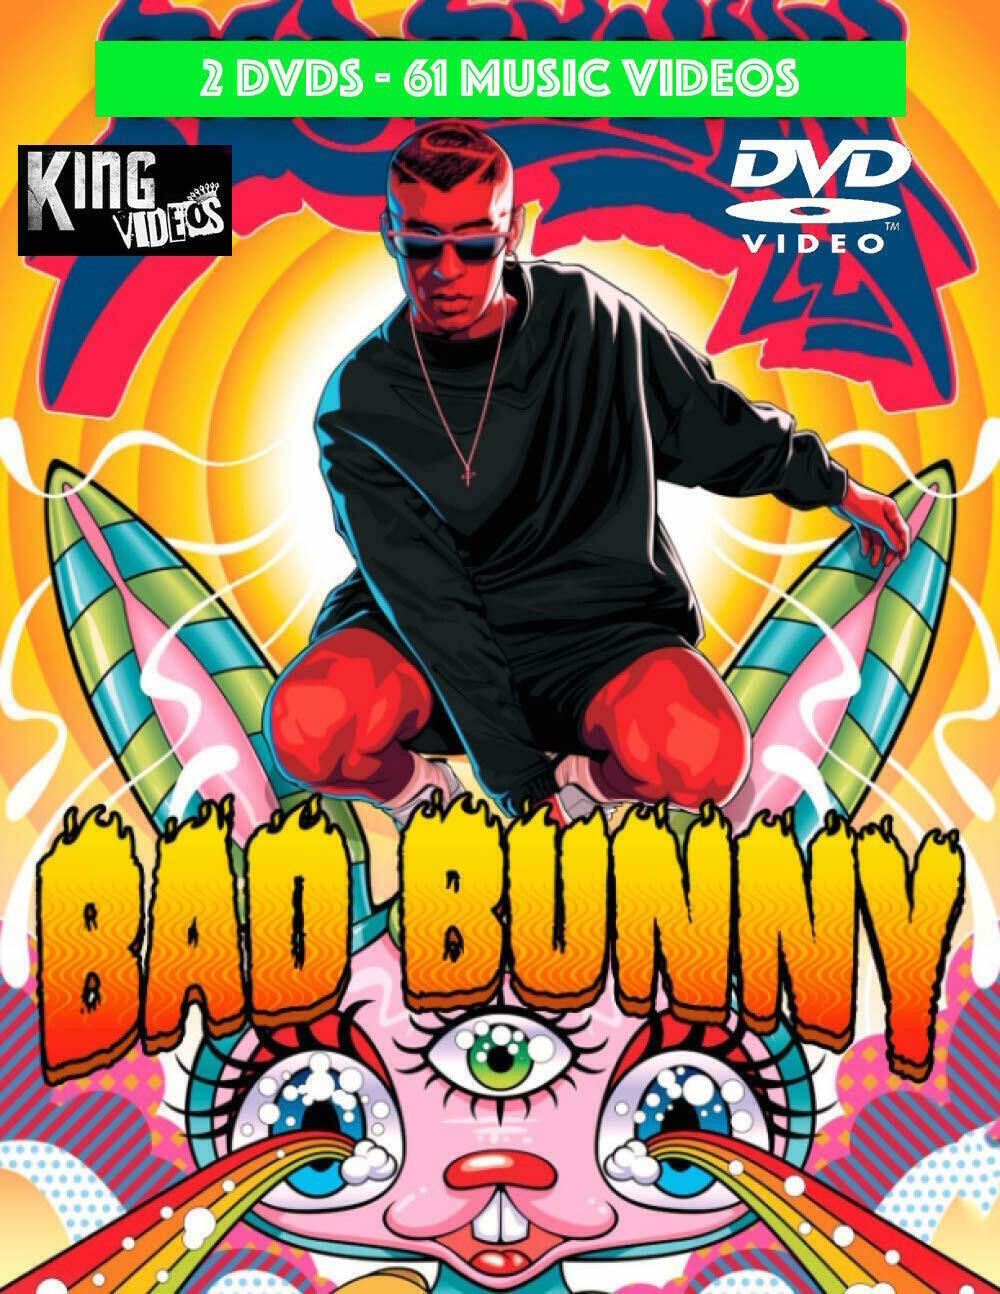 Bad Bunny 61 Music Videos [2 DVD Package]